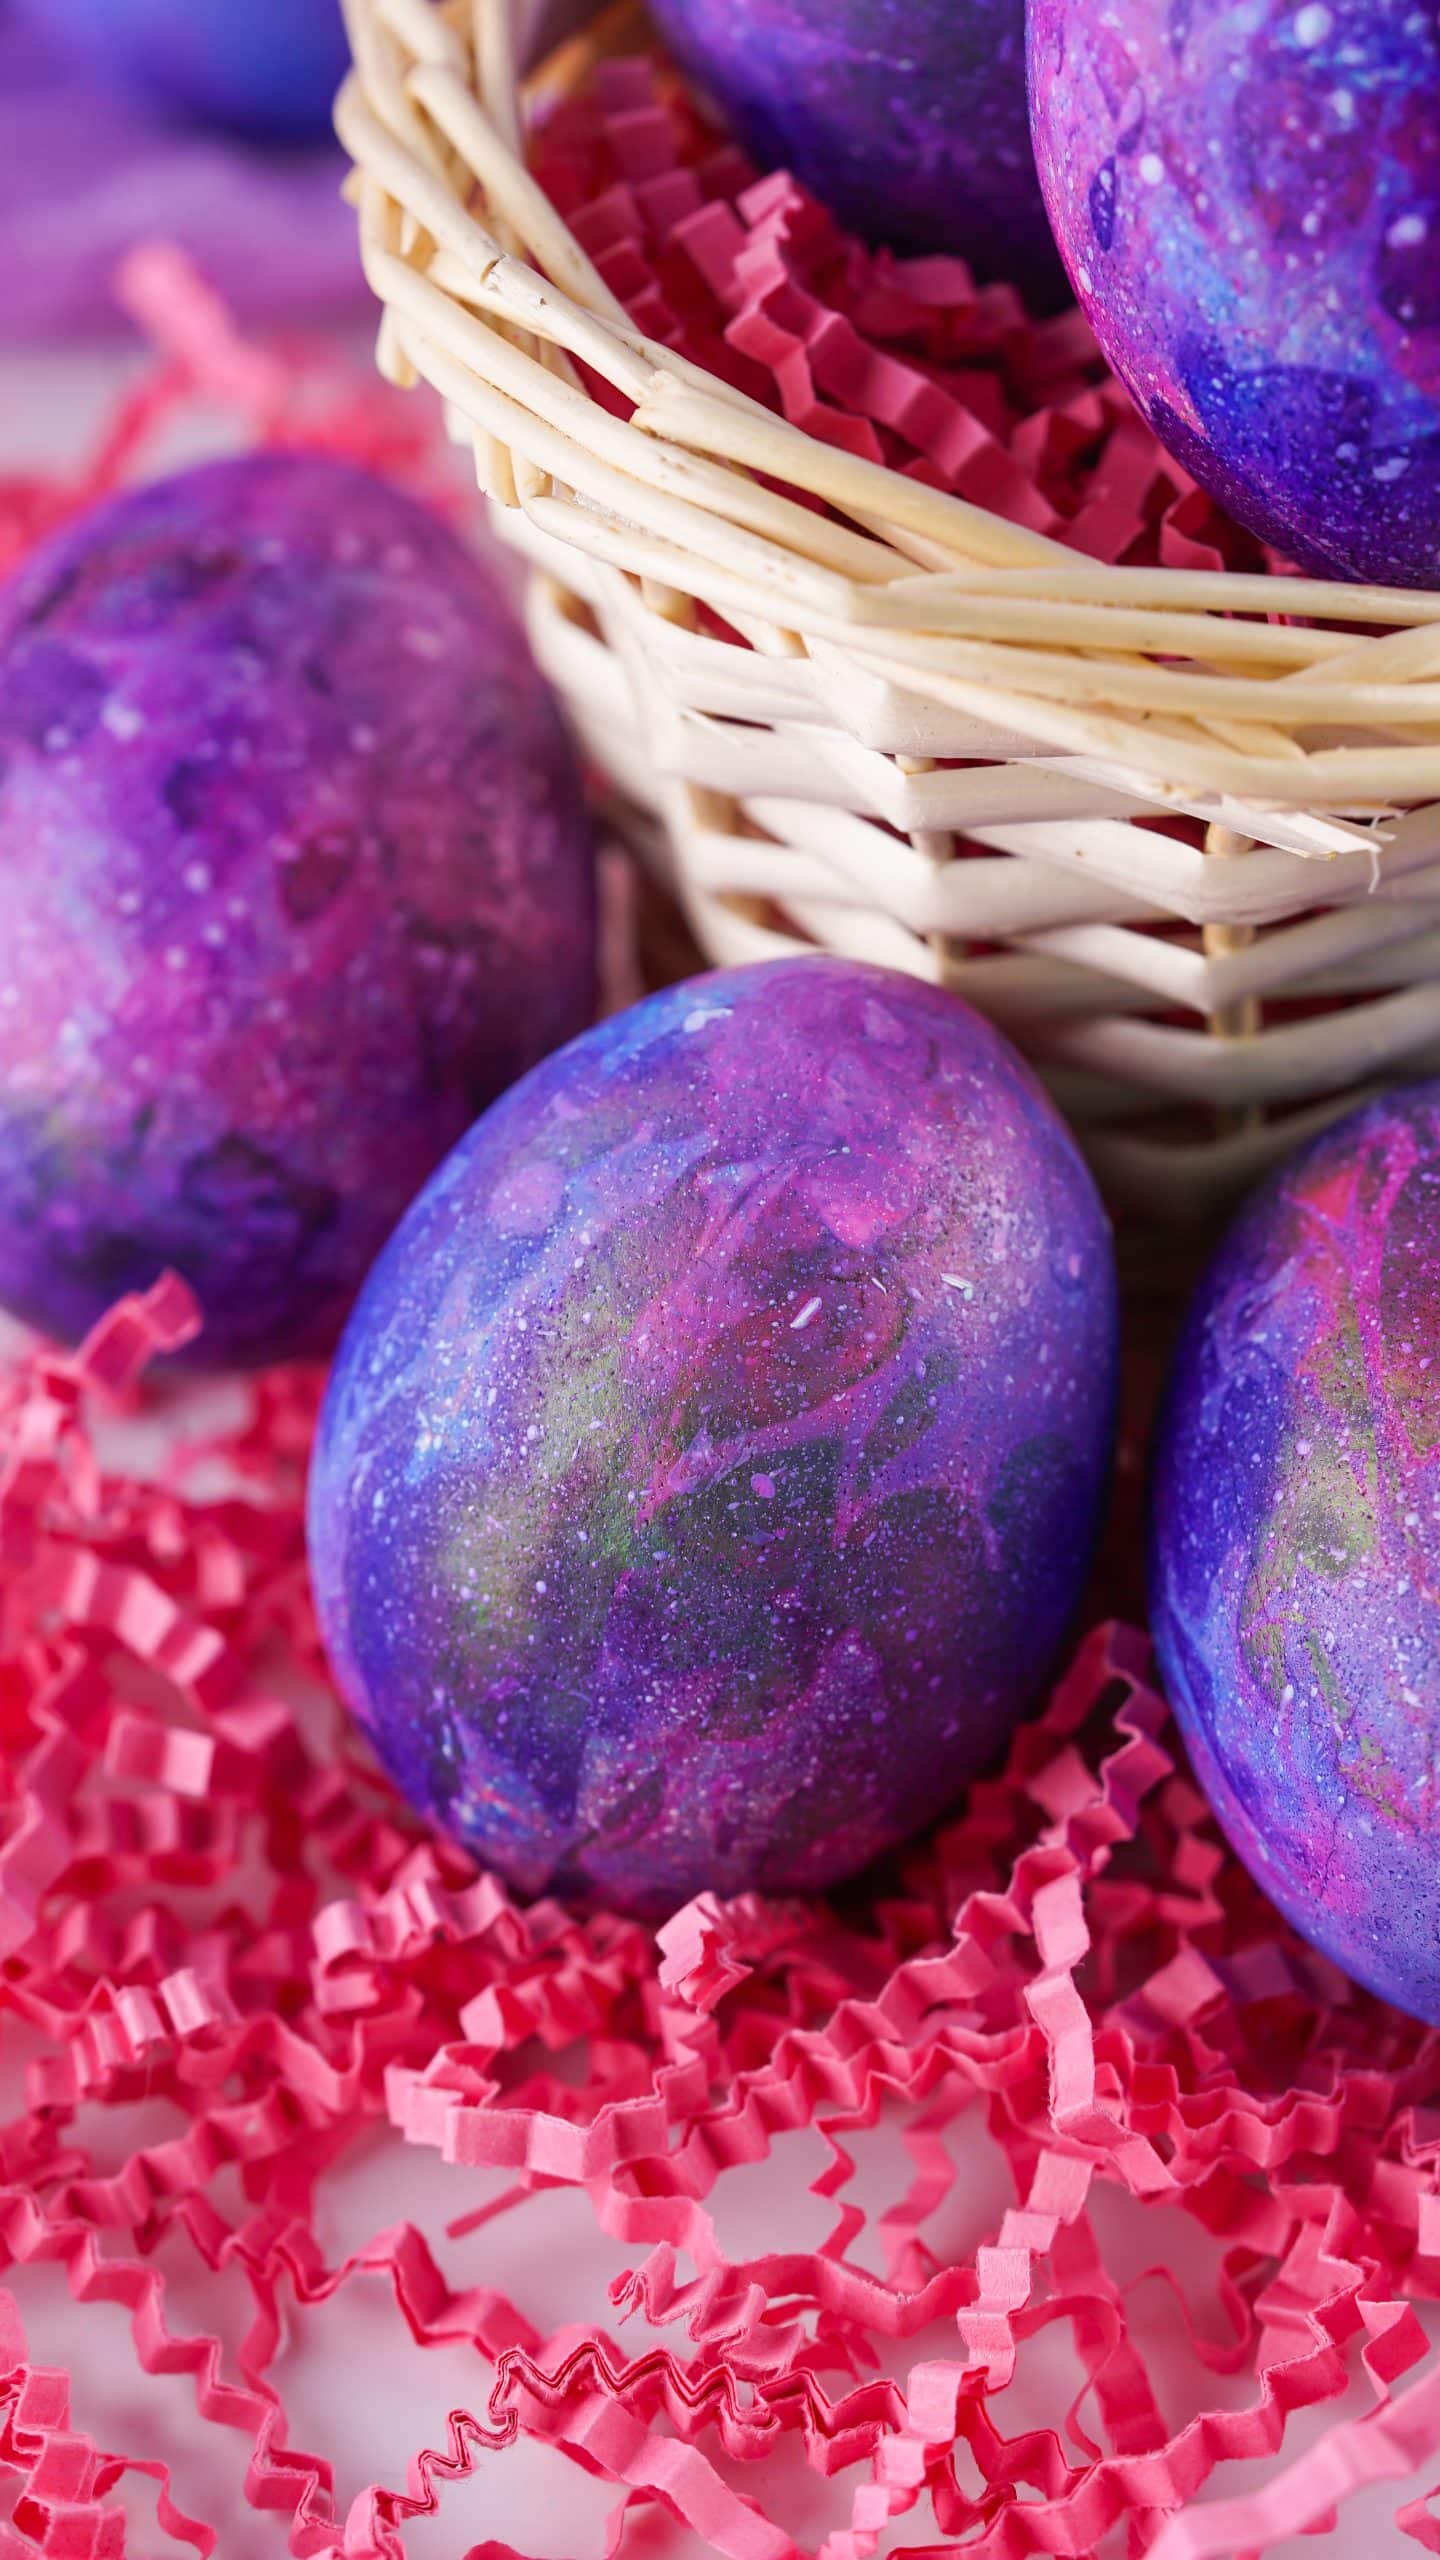 space colored dyed easter eggs resting on red crumpled strings of paper next to a straw basket